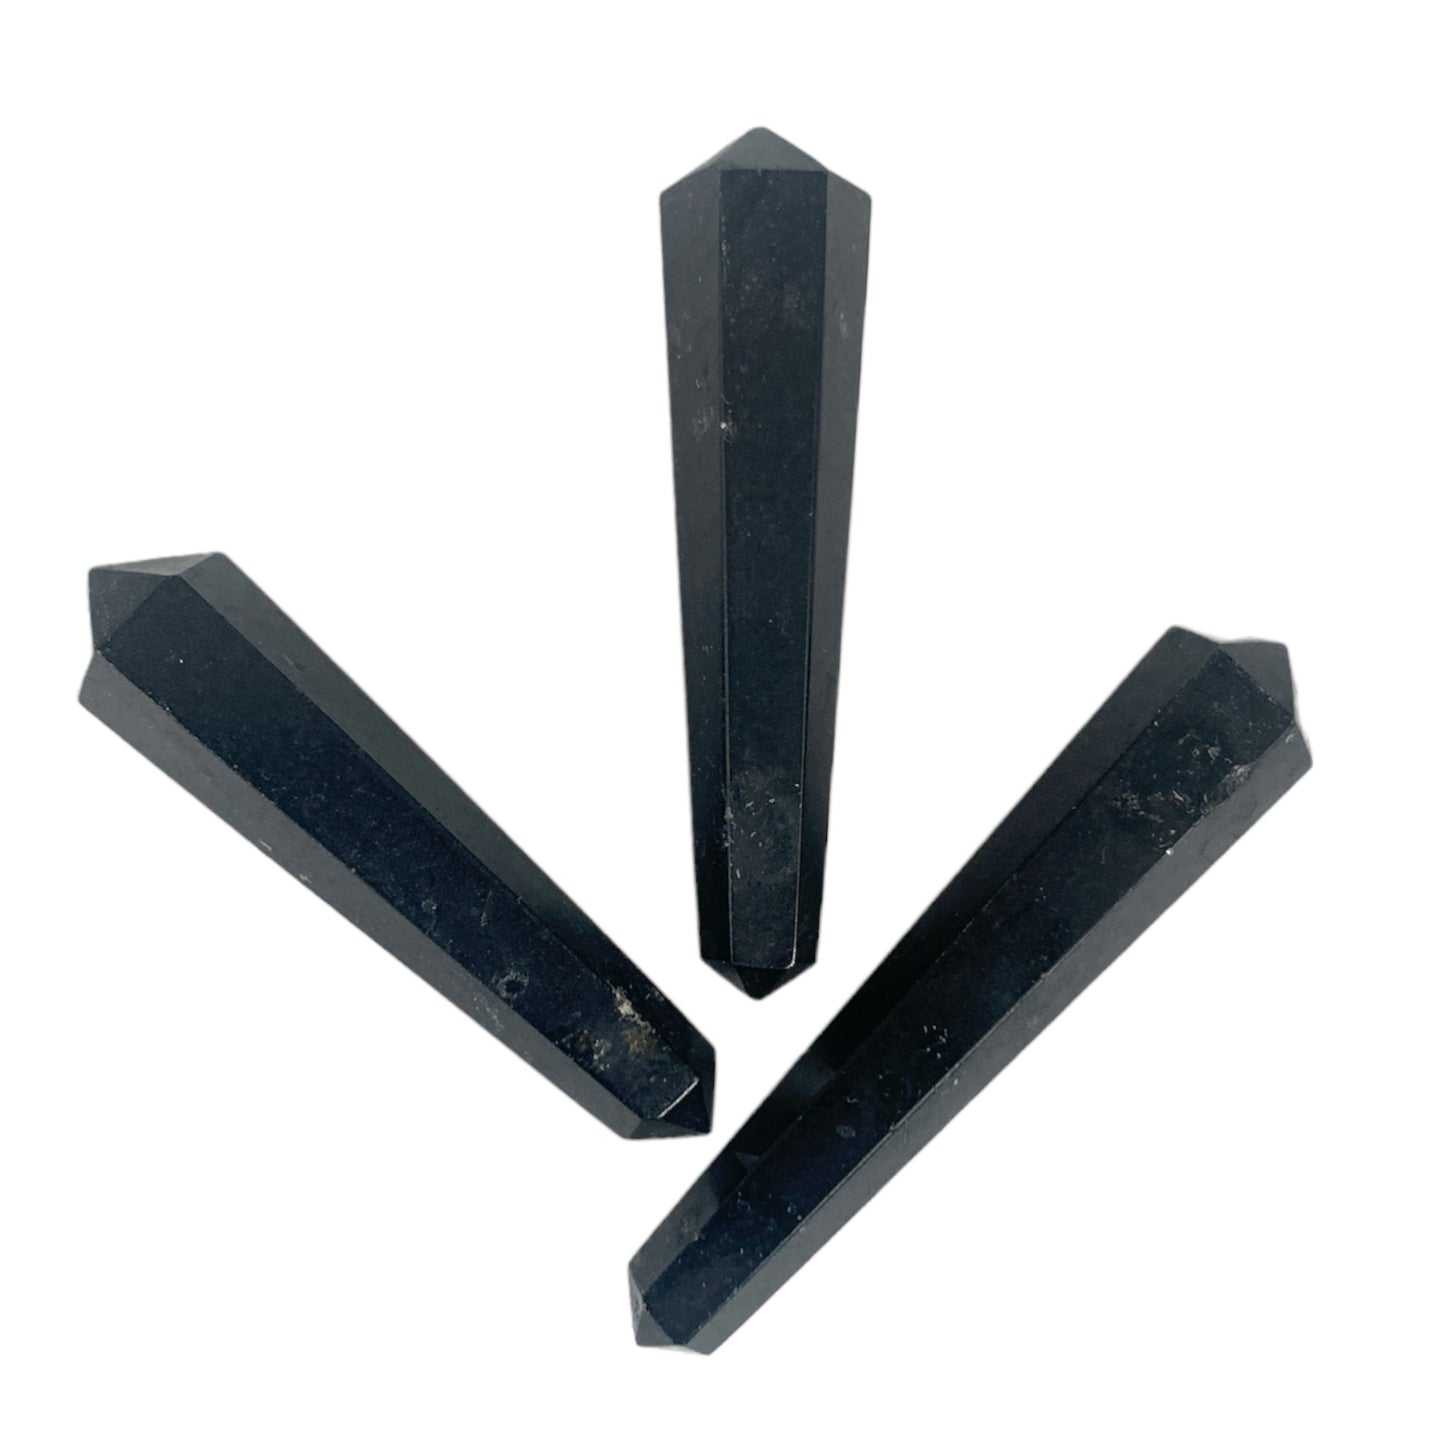 Black Tourmaline - 35-40mm - Double Terminated Pencil Points - 6 Grams - India - order in 5's - NEW1221